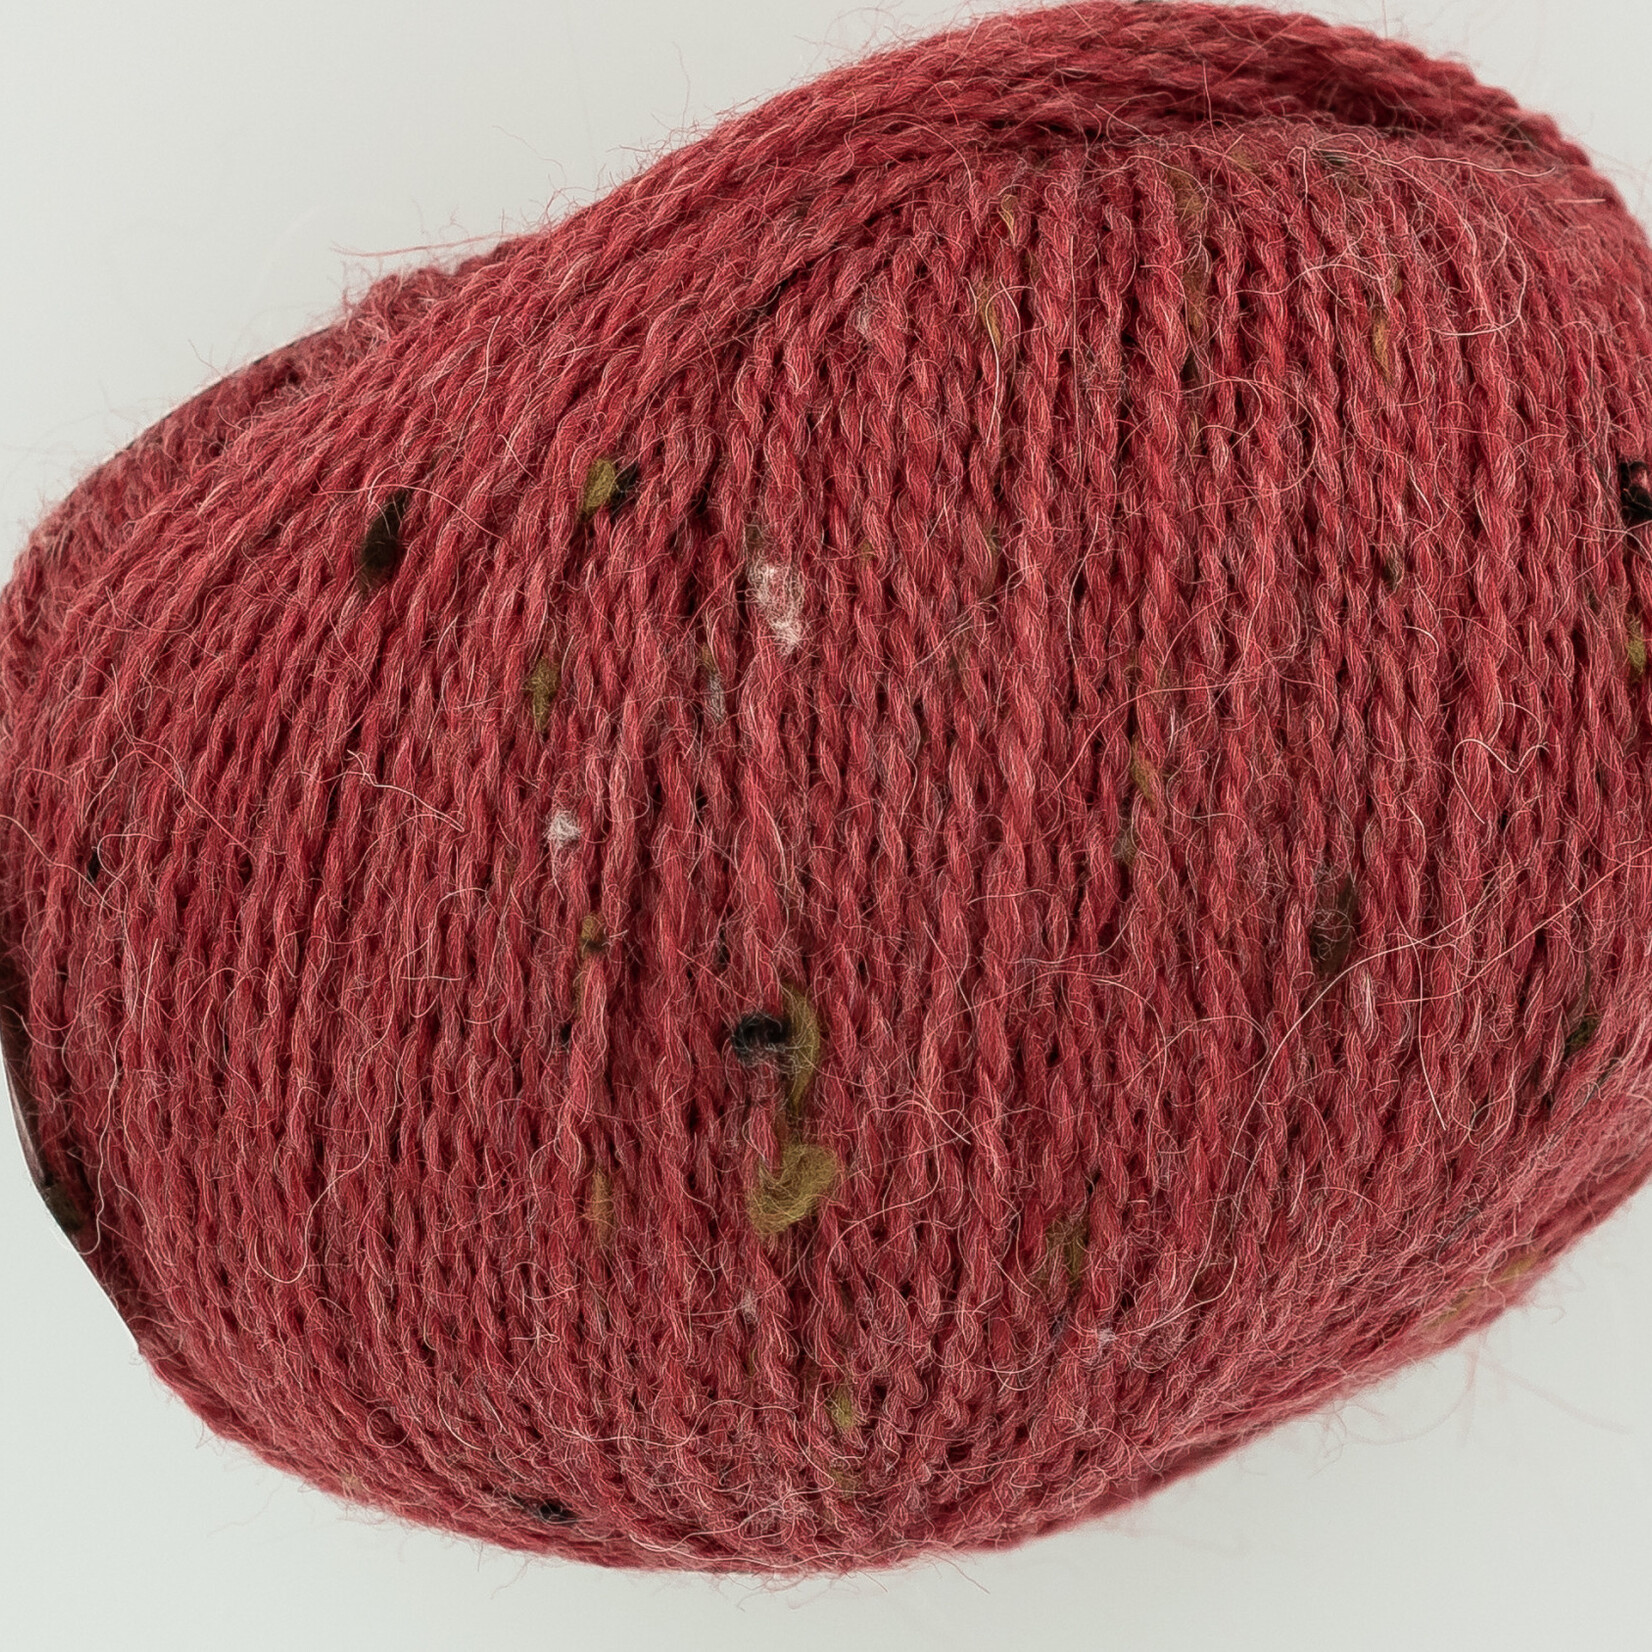 King Cole Homespun DK by King Cole